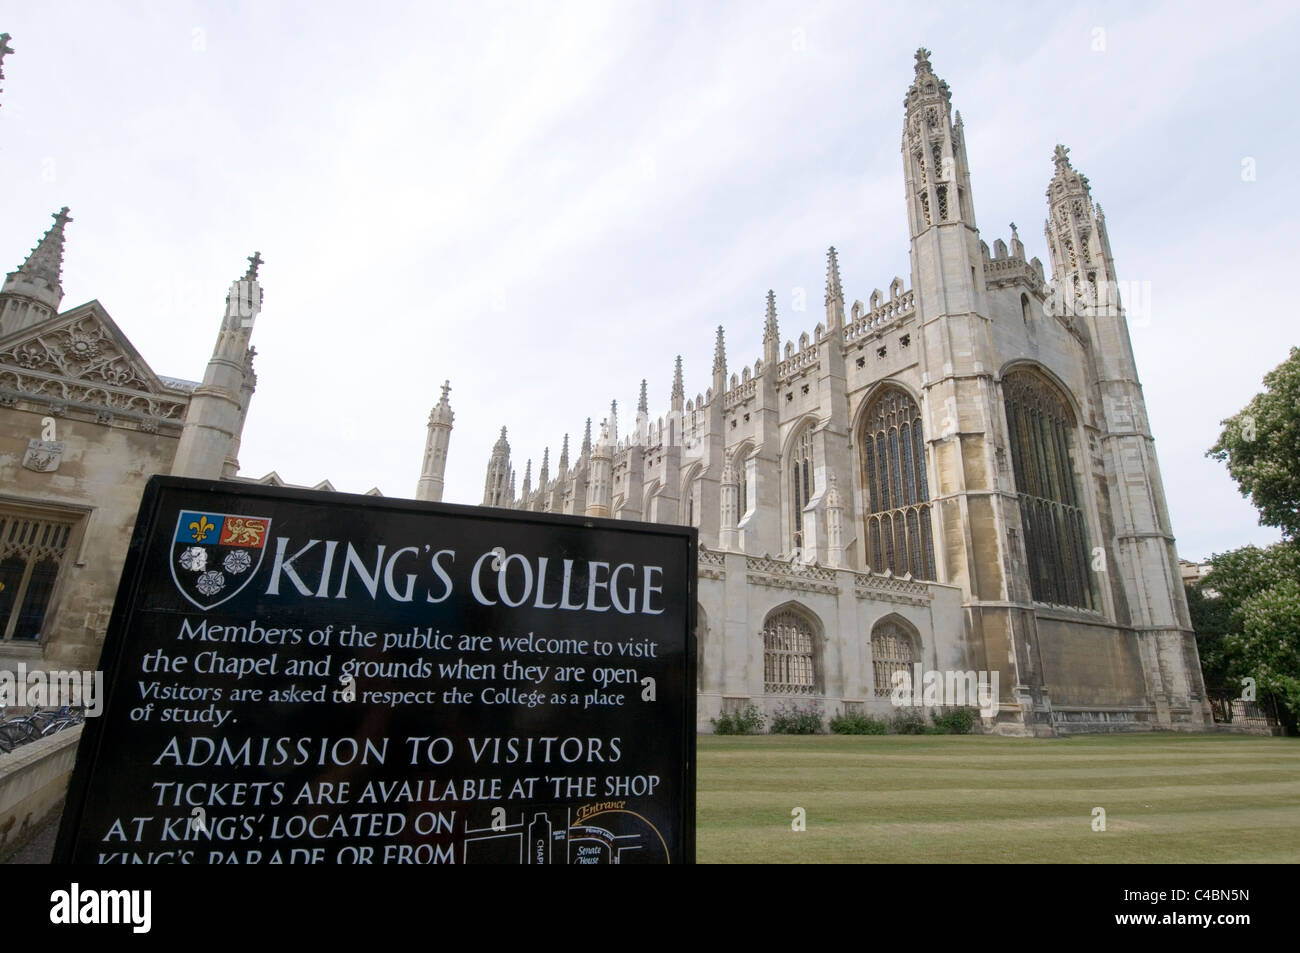 kings college cambridge uk university historic building buildings higher eduction university universities colleges famous highly Stock Photo